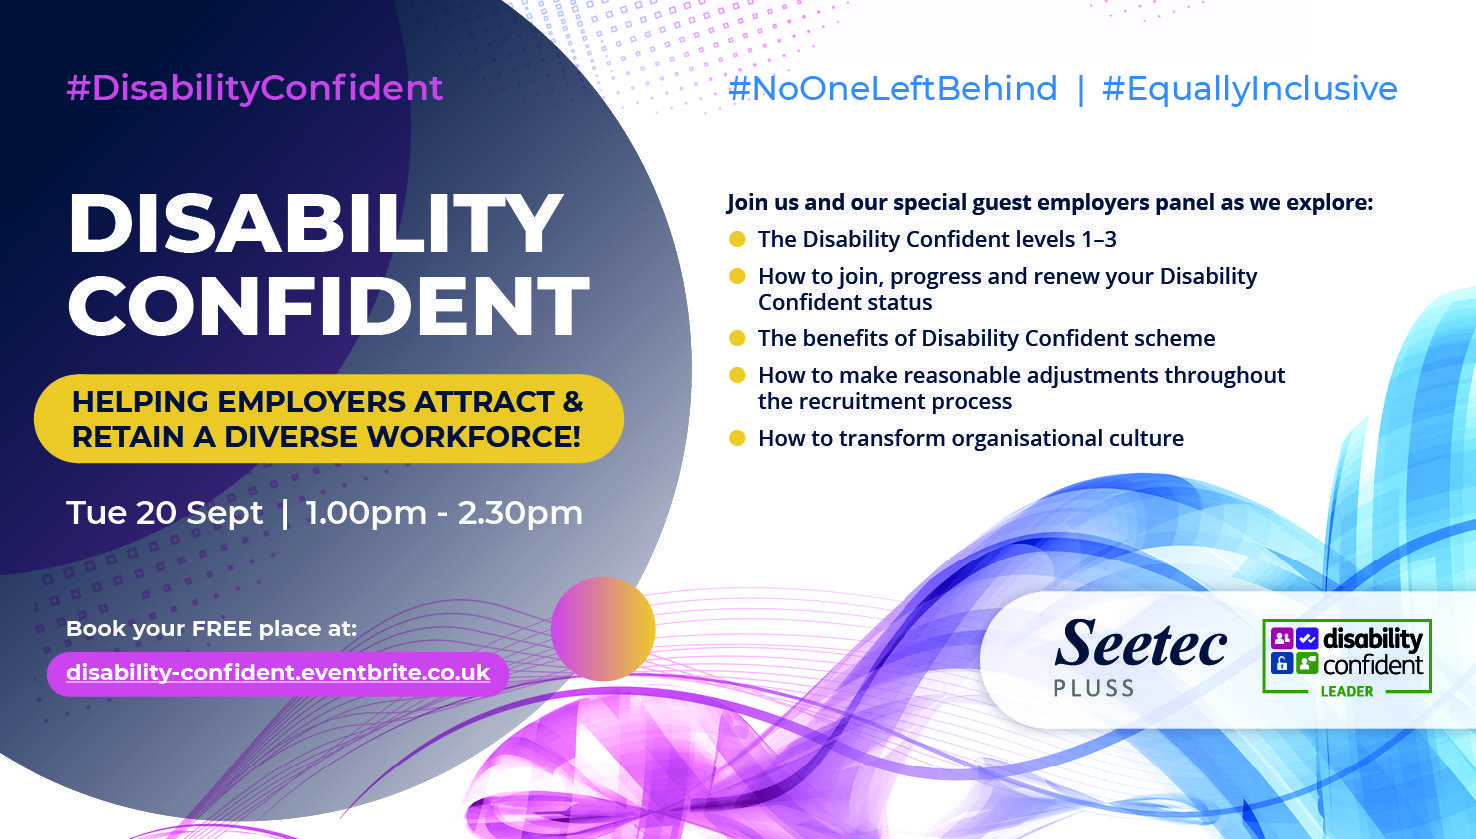 Seetec Pluss Disability Event for Employers Tuesday 20th September 1.00pm – 2.30pm